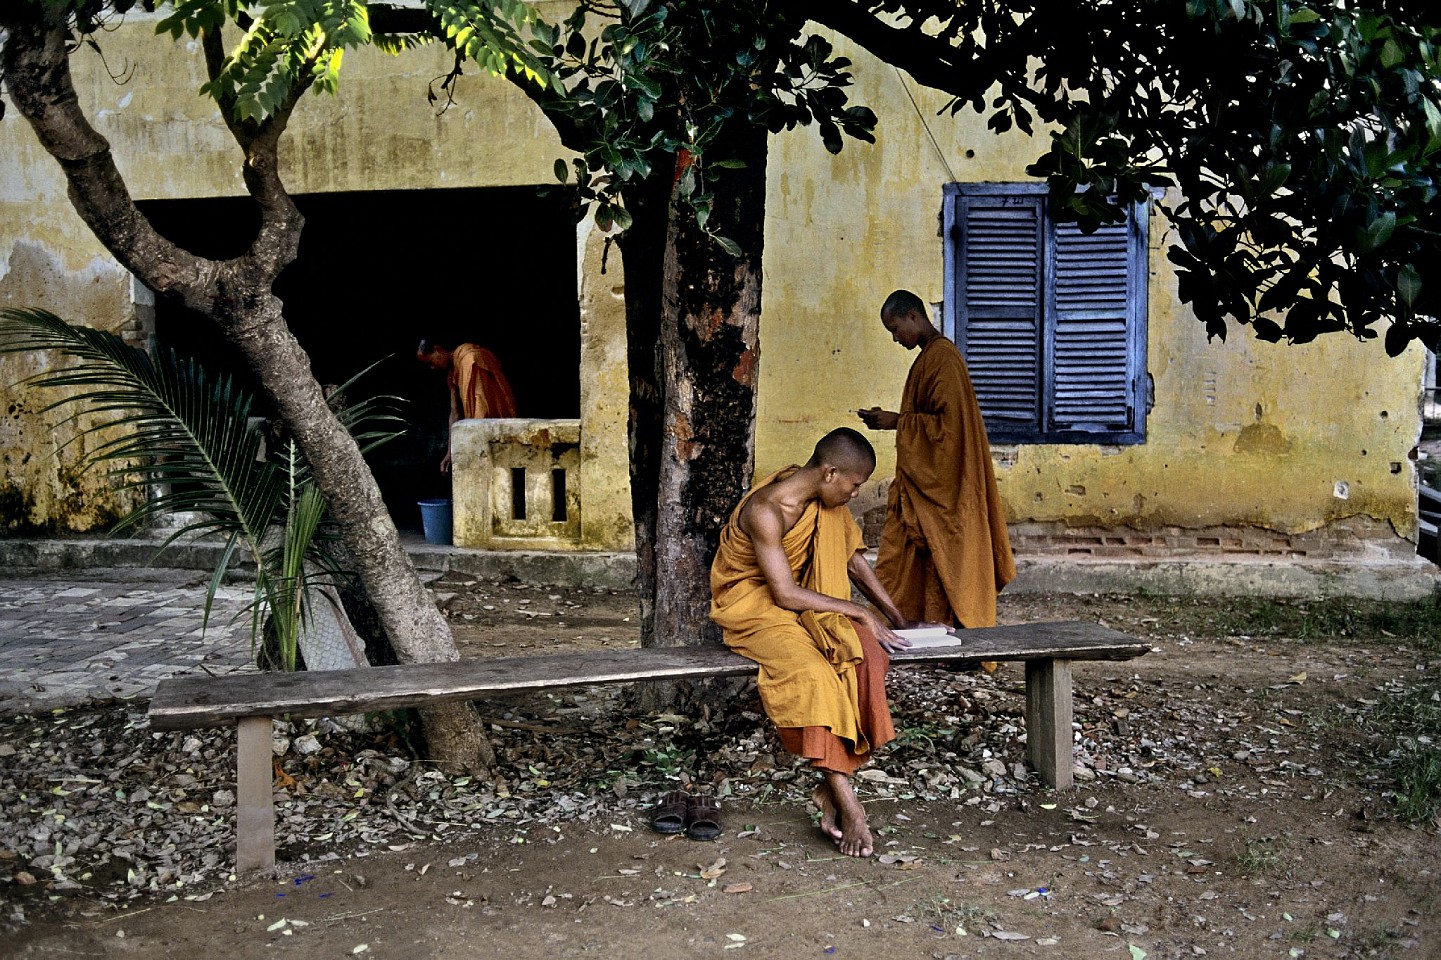 Steve McCurry, Monks Read at Siem Reap Monastery, 1999
FujiFlex Crystal Archive Print
Price/Size on request